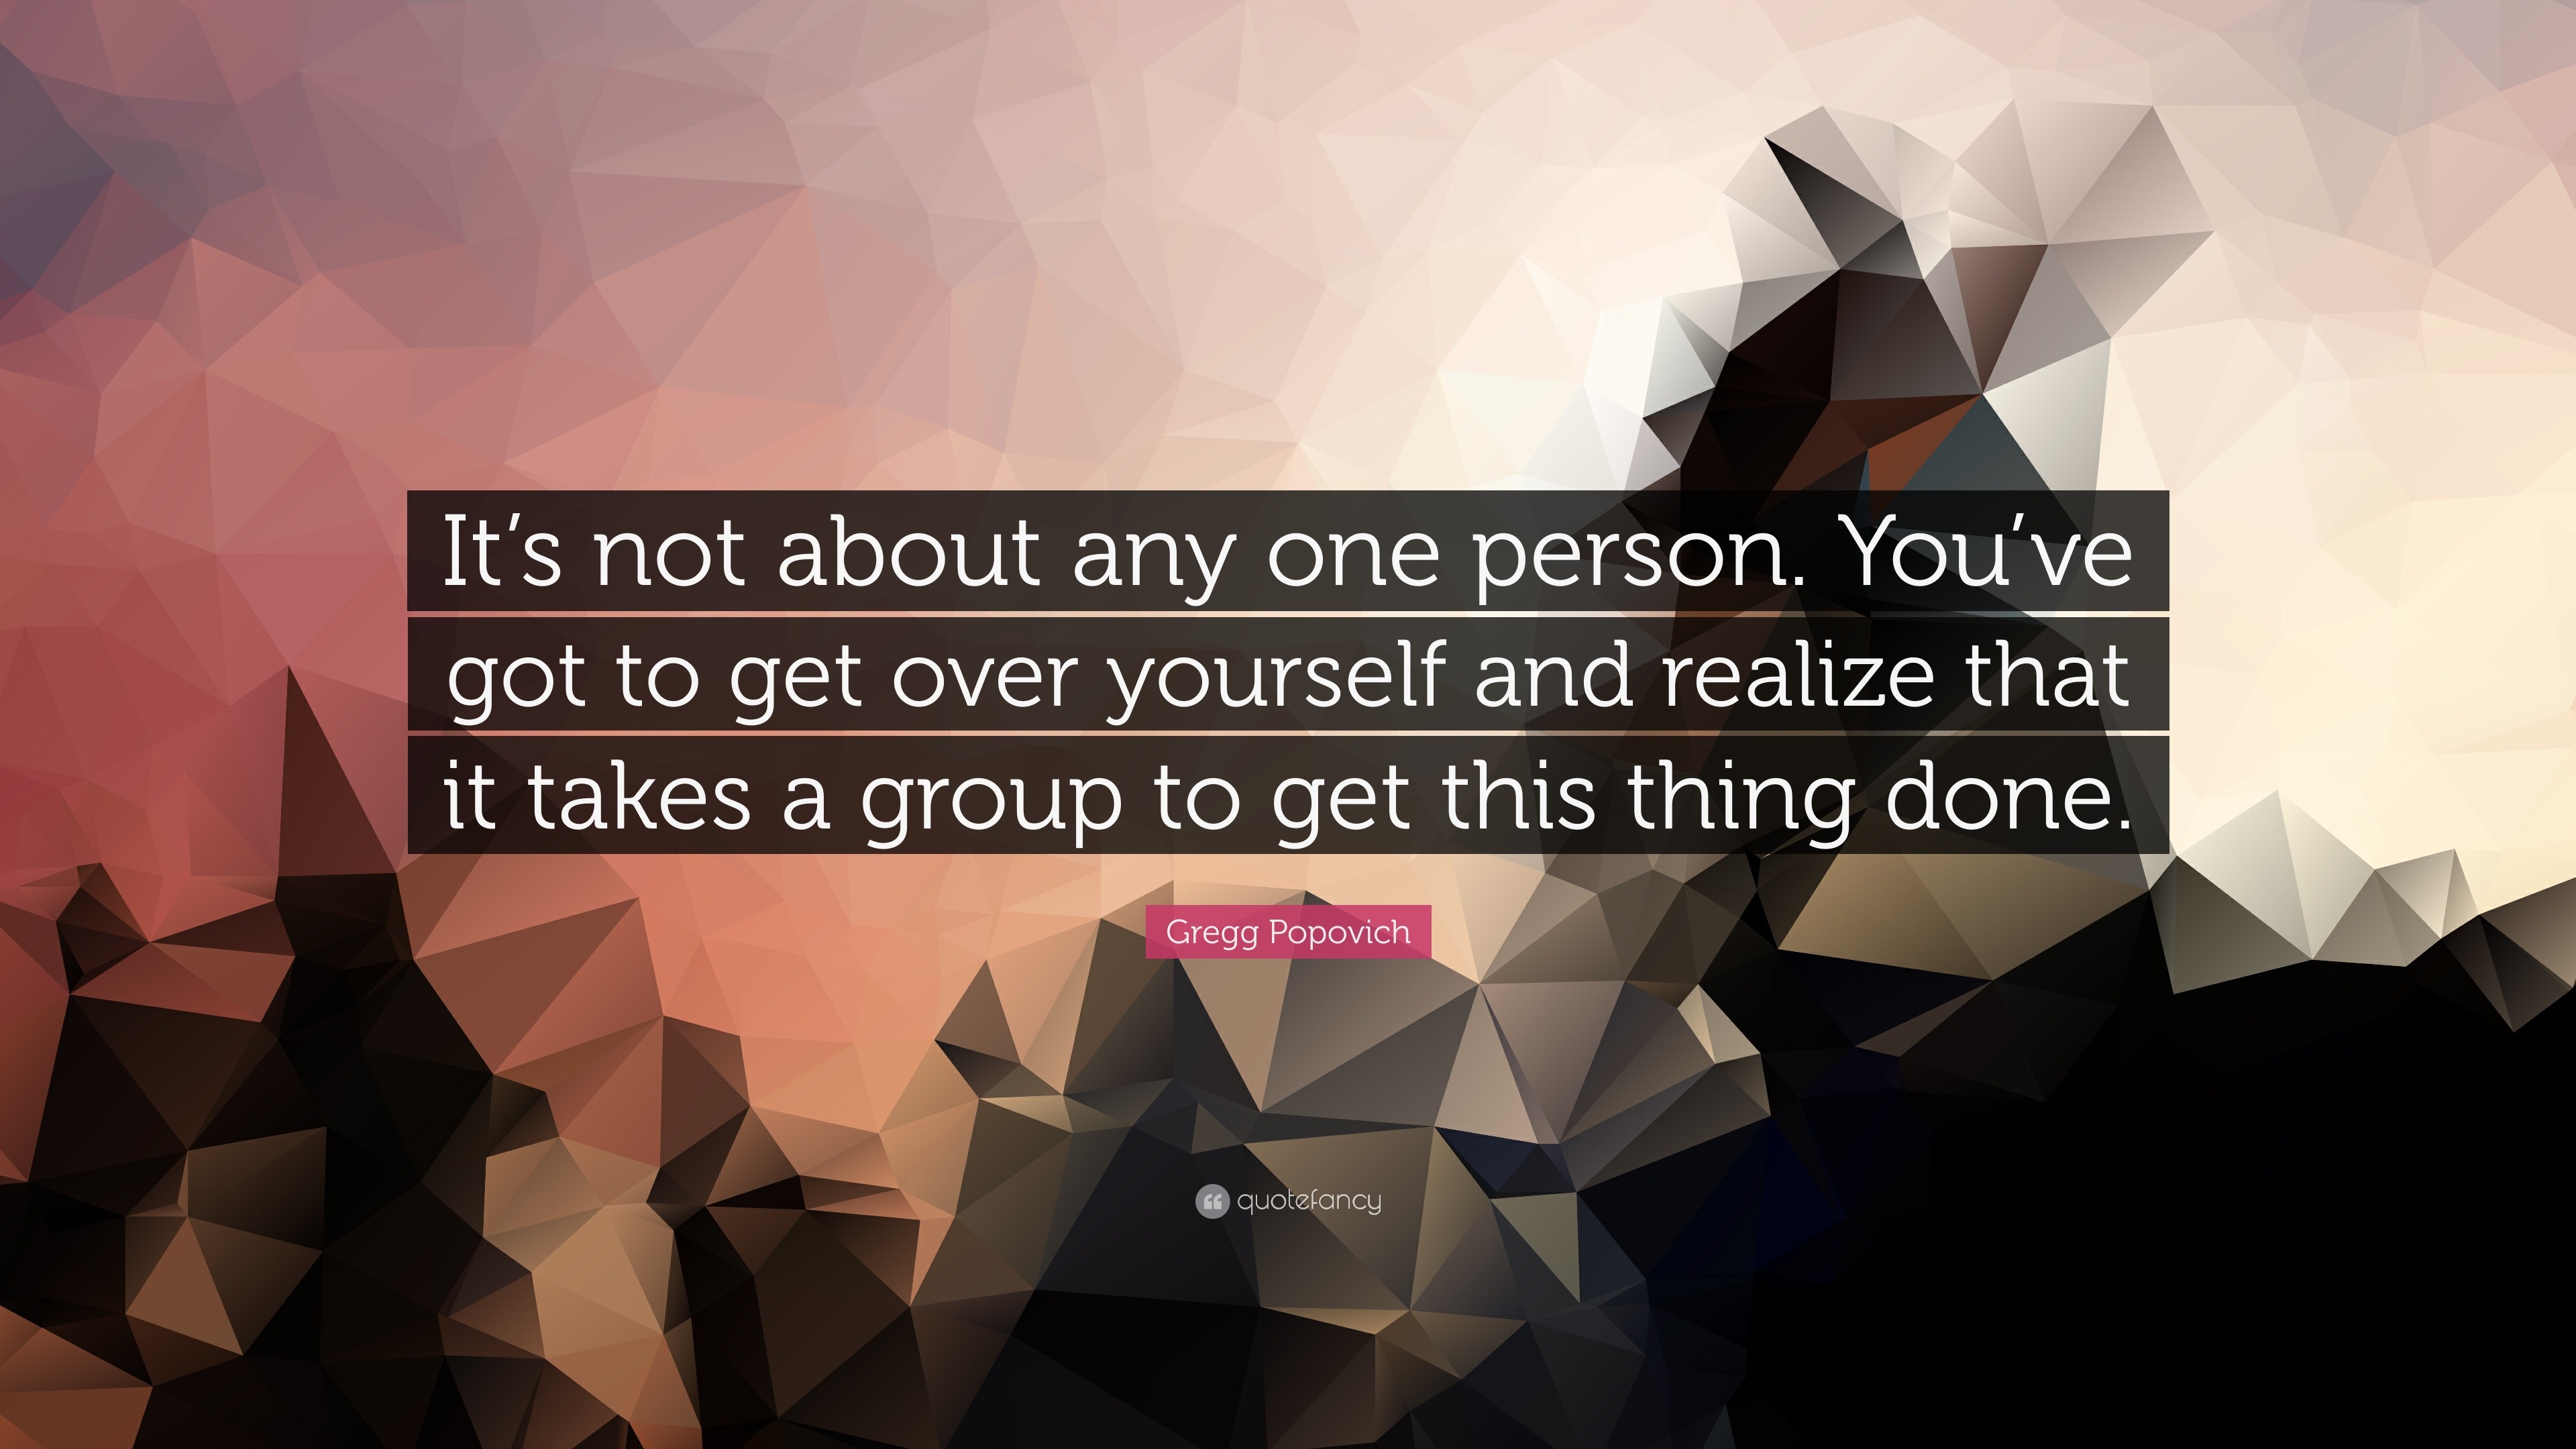 Gregg Popovich Quote: “It's not about any one person. You've got to get over  yourself 